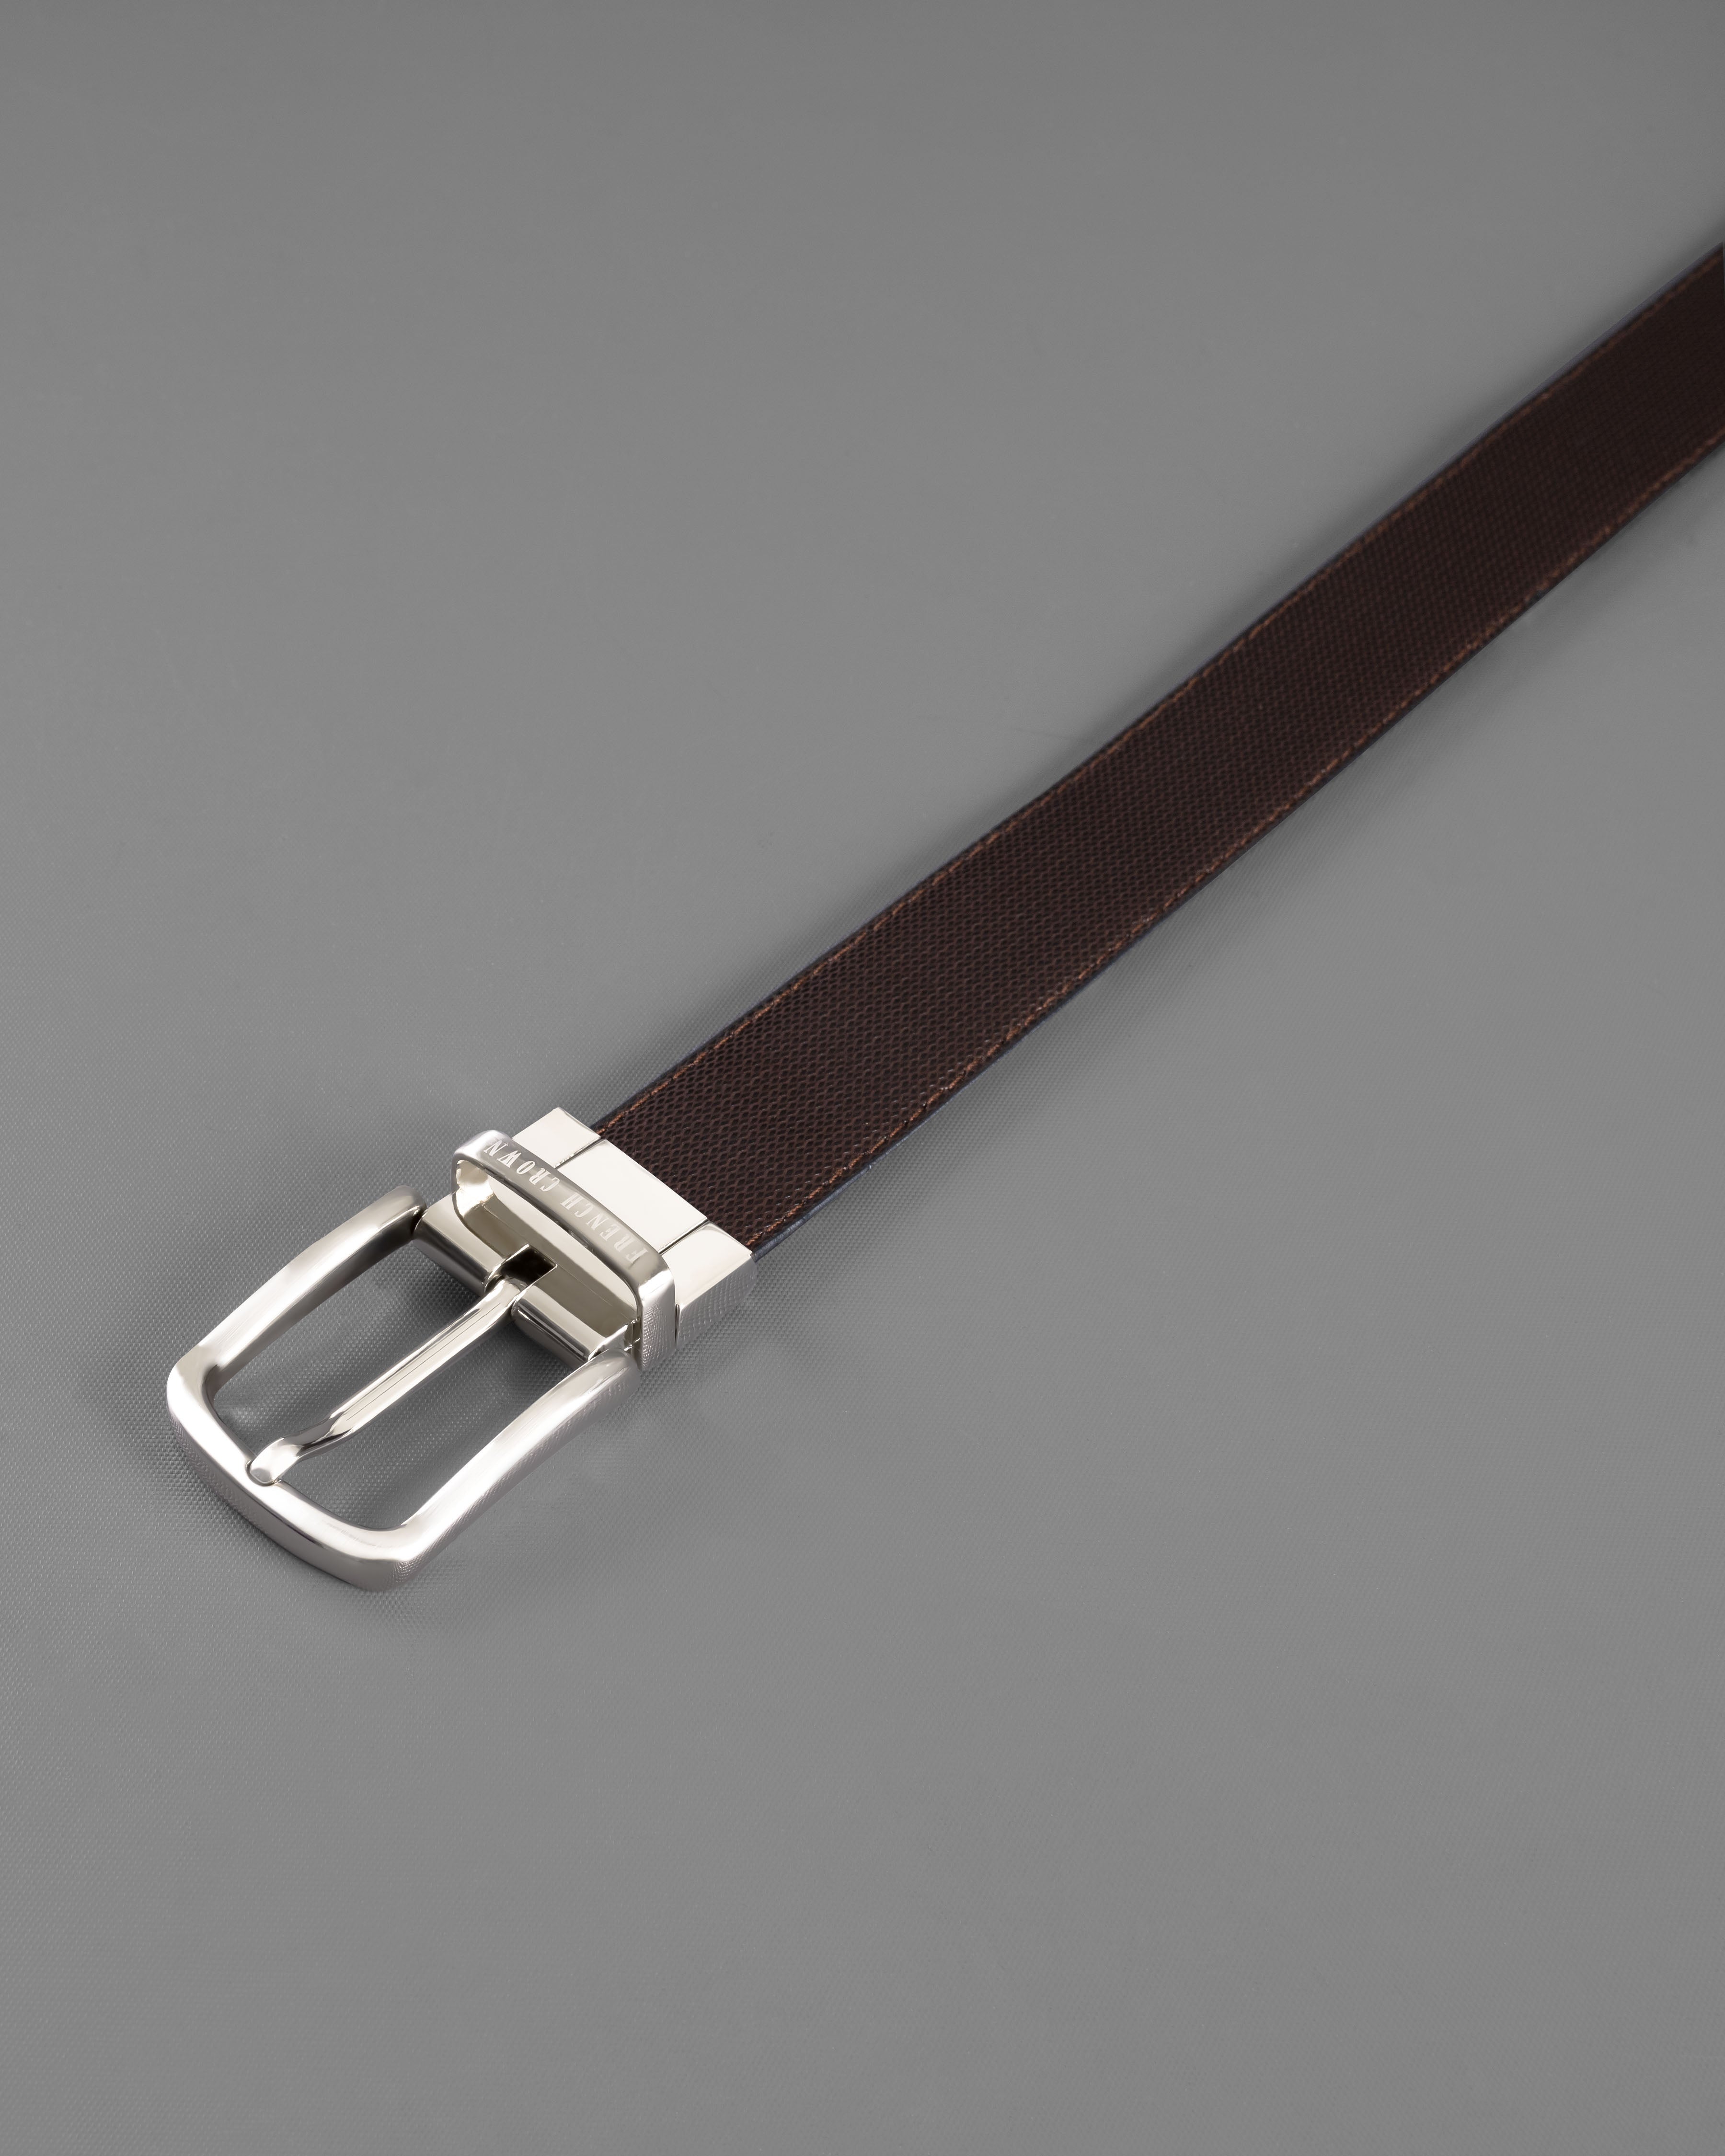 Silver Shiny Buckle With Jade Black and Brown  Leather Free Handcrafted Reversible Belt BT096-28, BT096-30, BT096-32, BT096-34, BT096-36, BT096-38